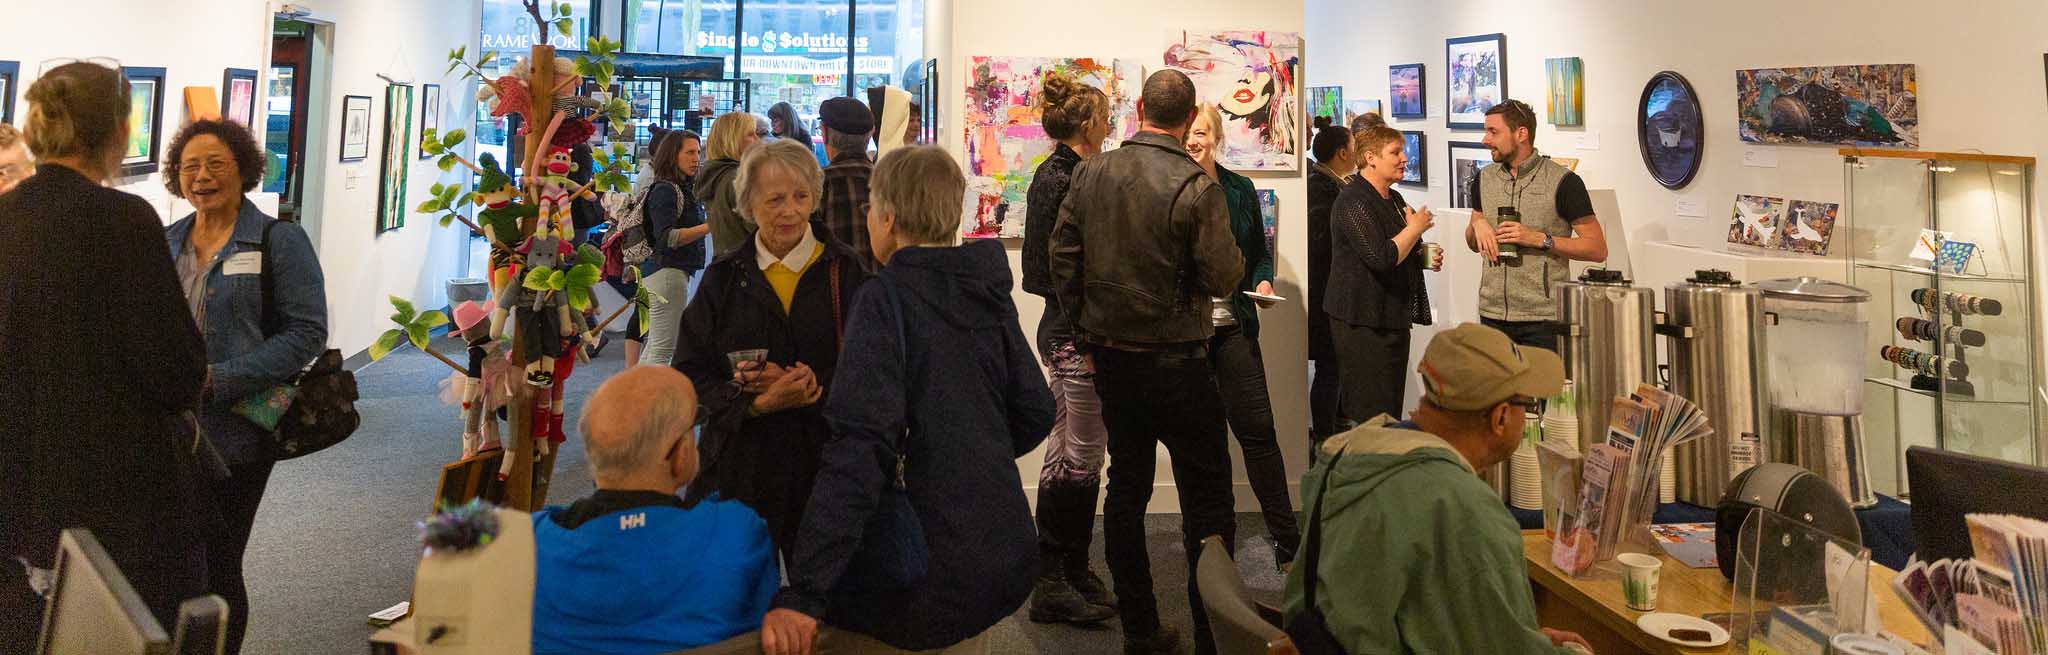 A large group of people milling about at an art opening